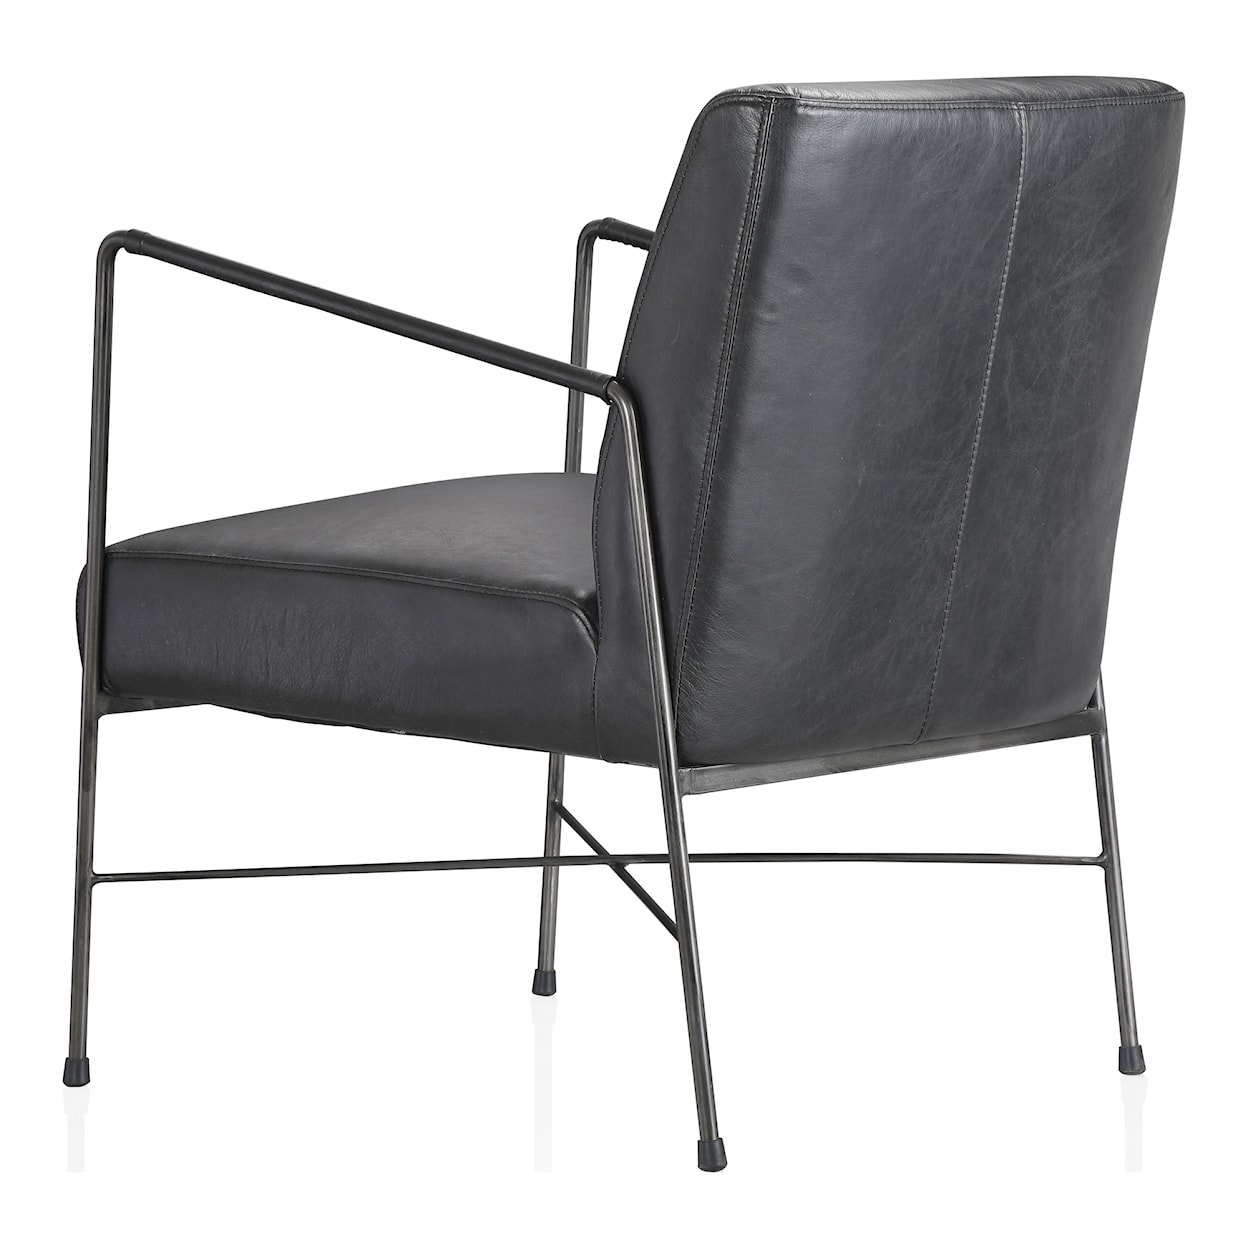 Moe's Home Collection Dagwood Dagwood Leather Arm Chair Onyx Black Leather